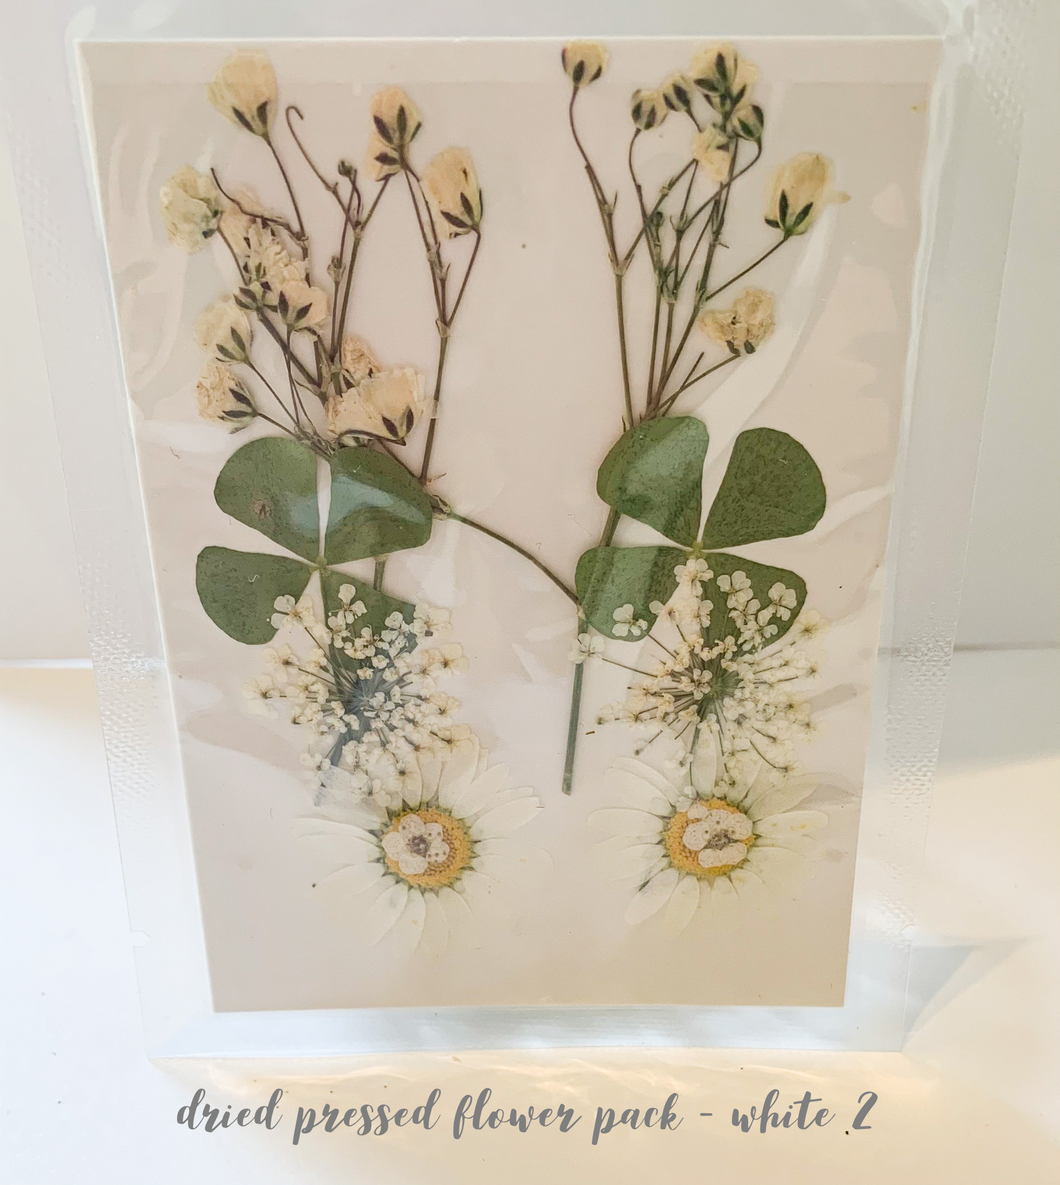 Small Dried Pressed Flower Pack - White 2